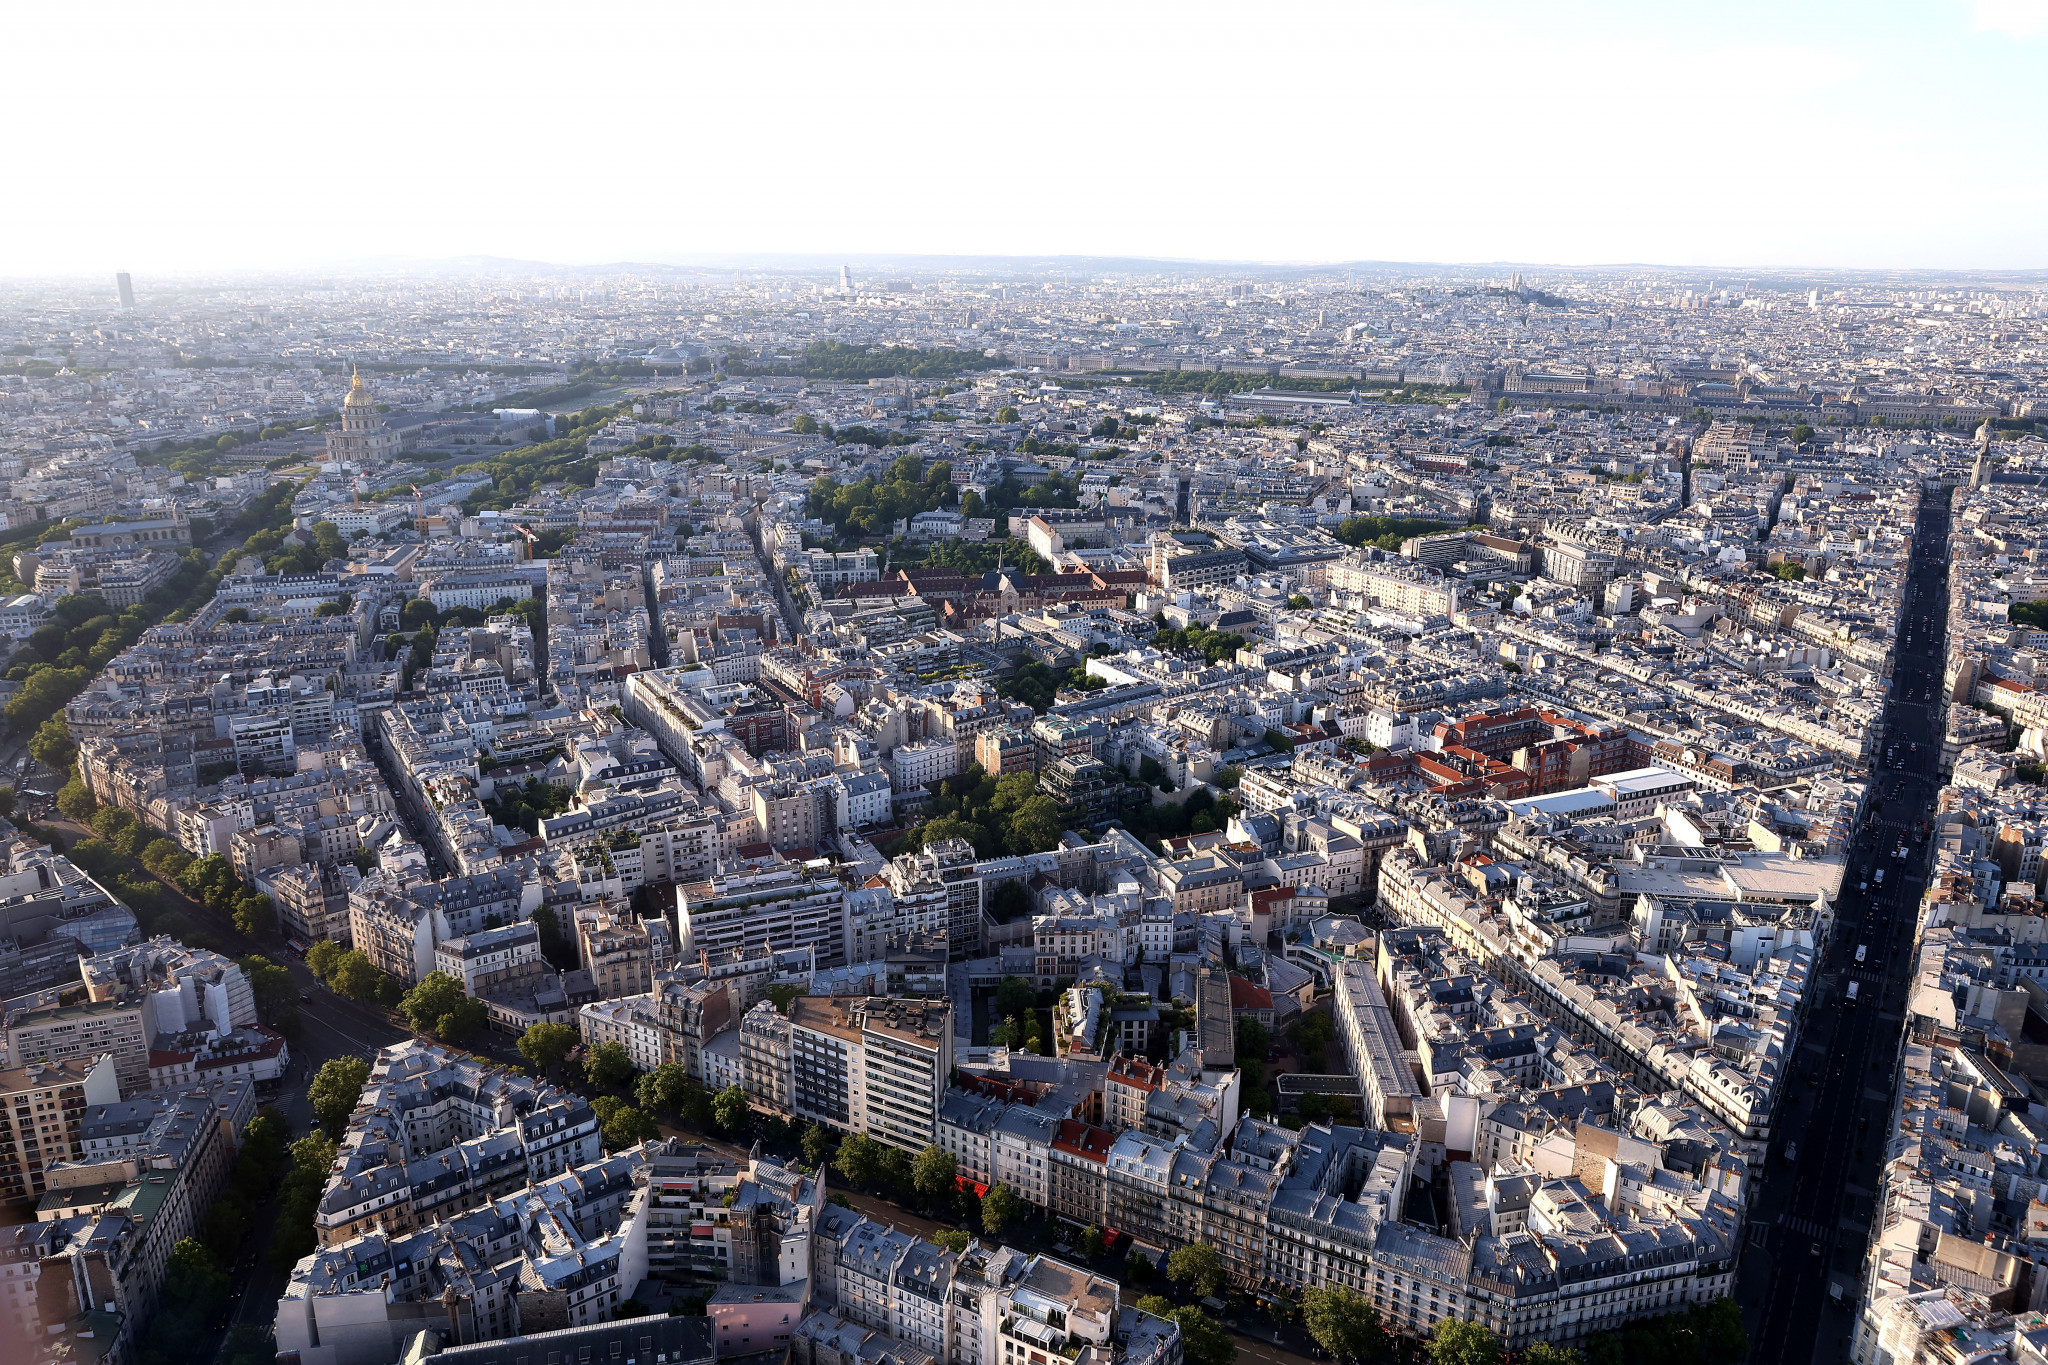 Paris 2024 has insisted it is 